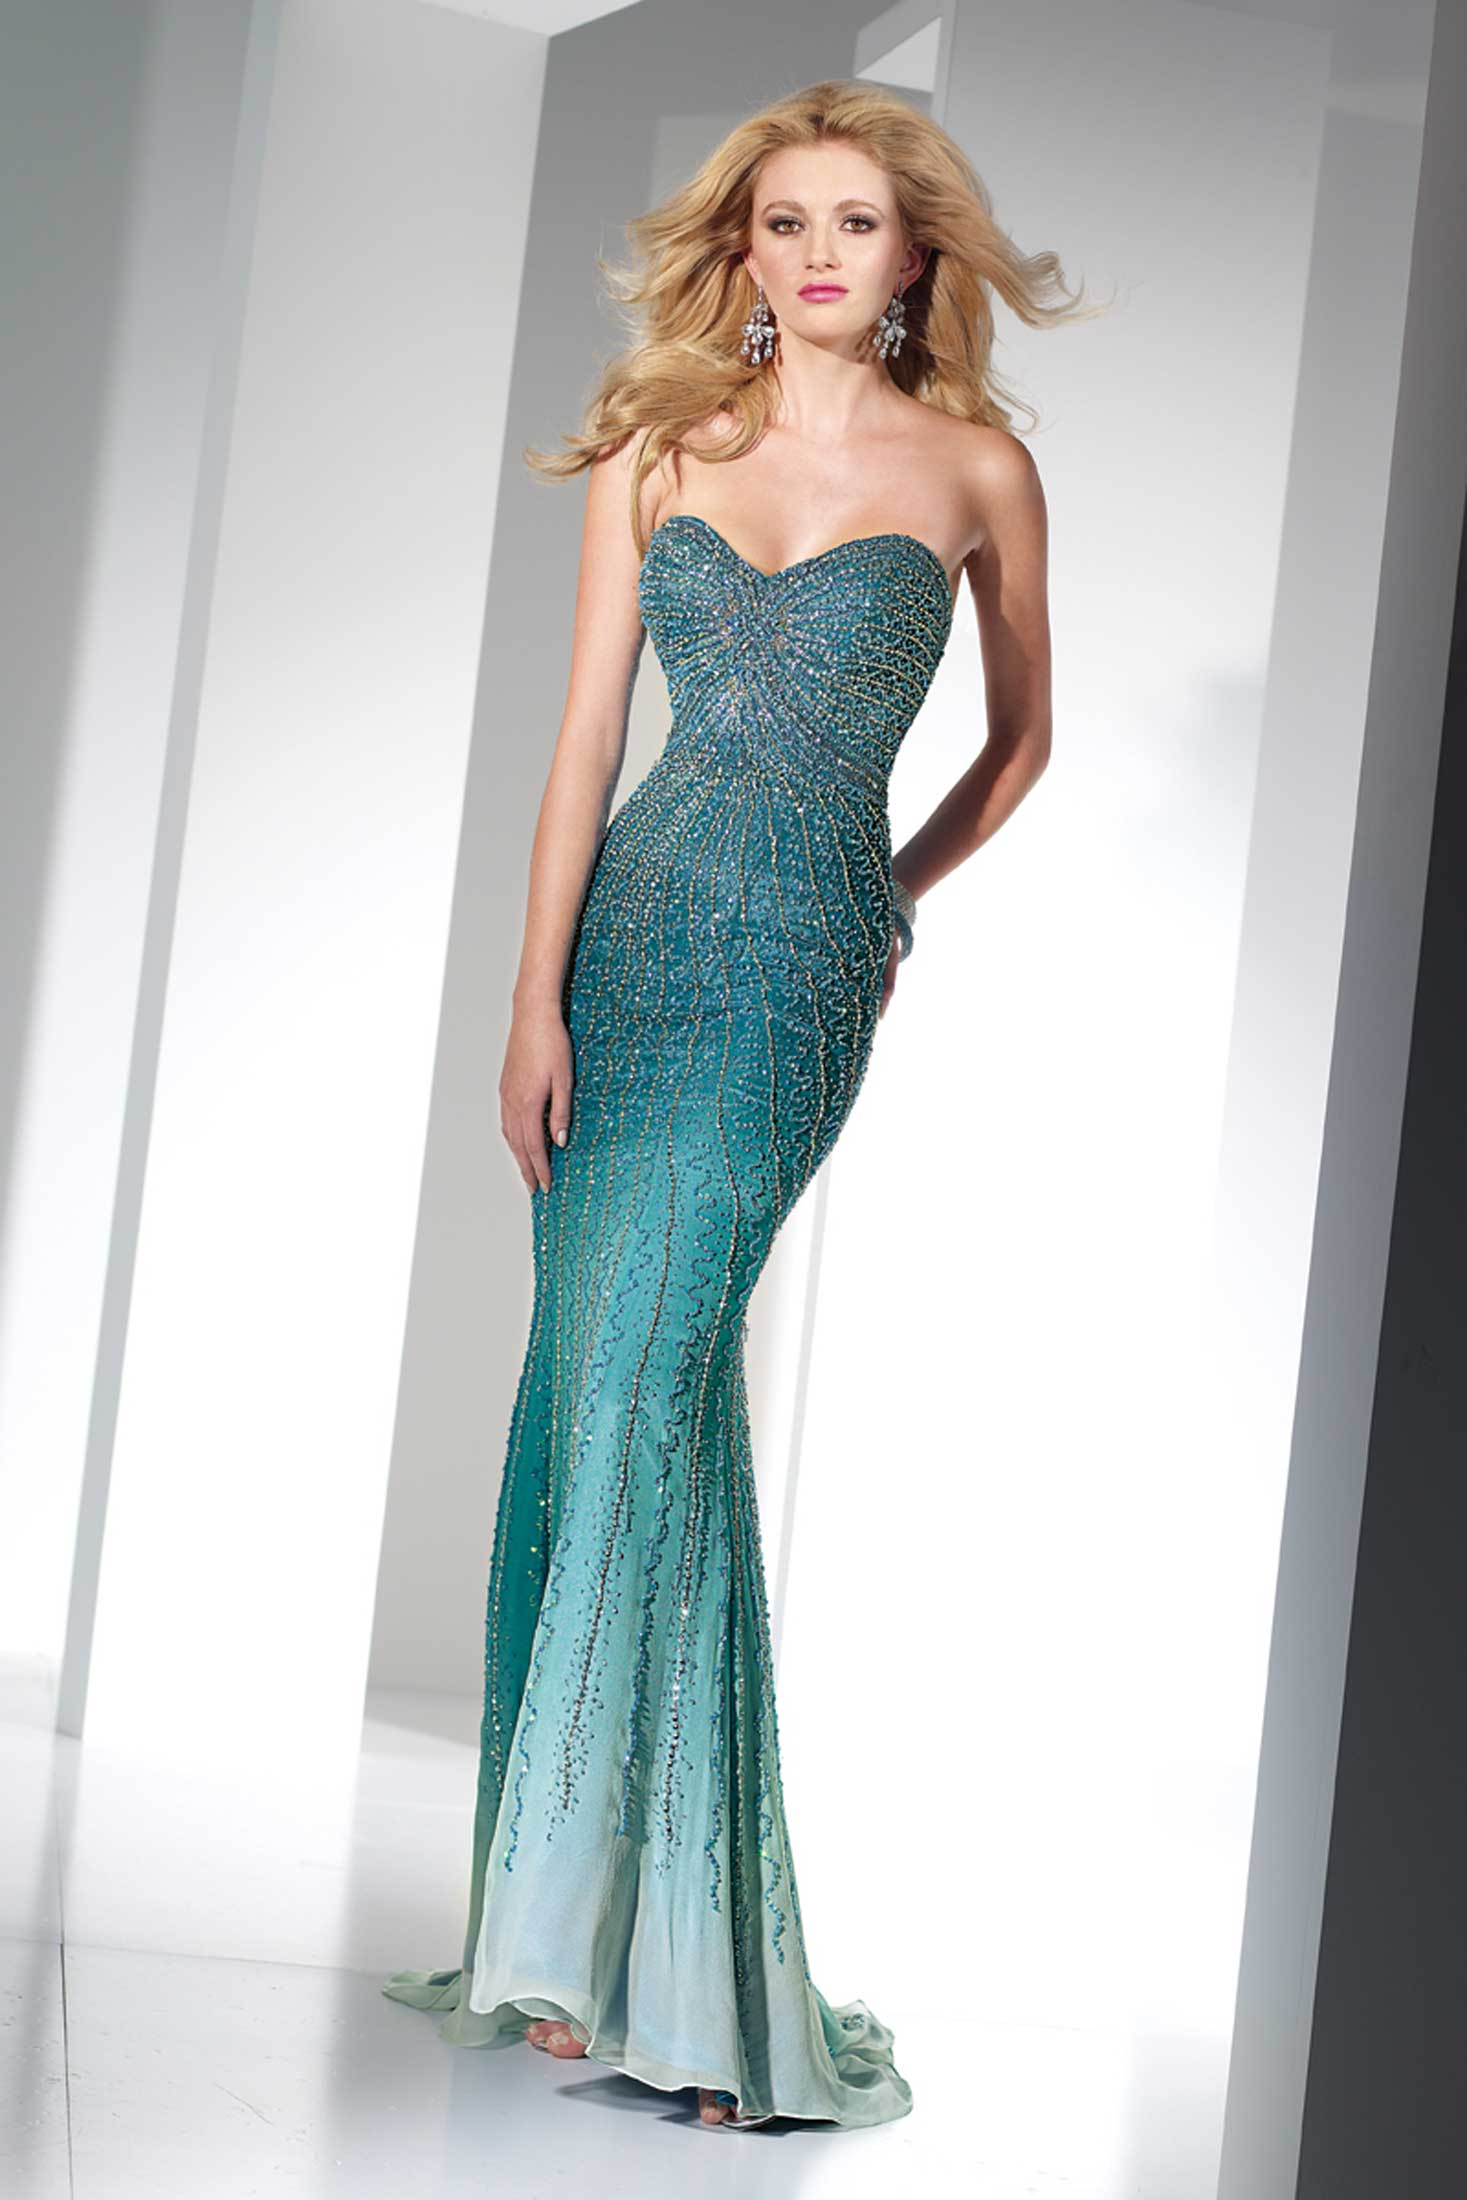 Best Dresses For Prom In Bakersfield Beautiful Dresses